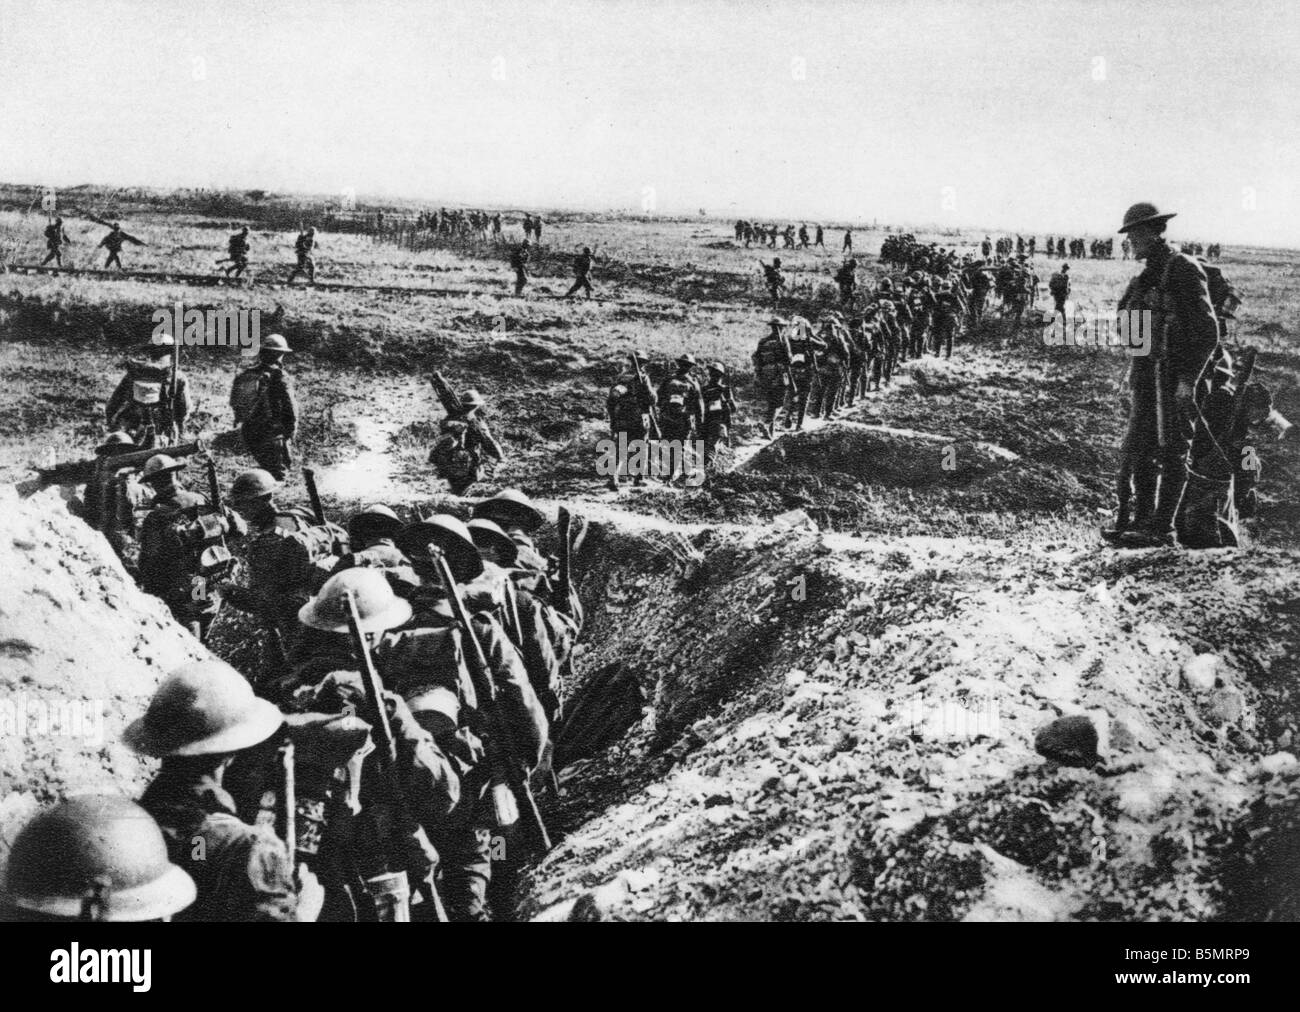 9 1918 9 27 A1 Western Front 1918 Eng stormtroopers World War I 1914 18 Decisive battle on the western front Offensive by the al Stock Photo